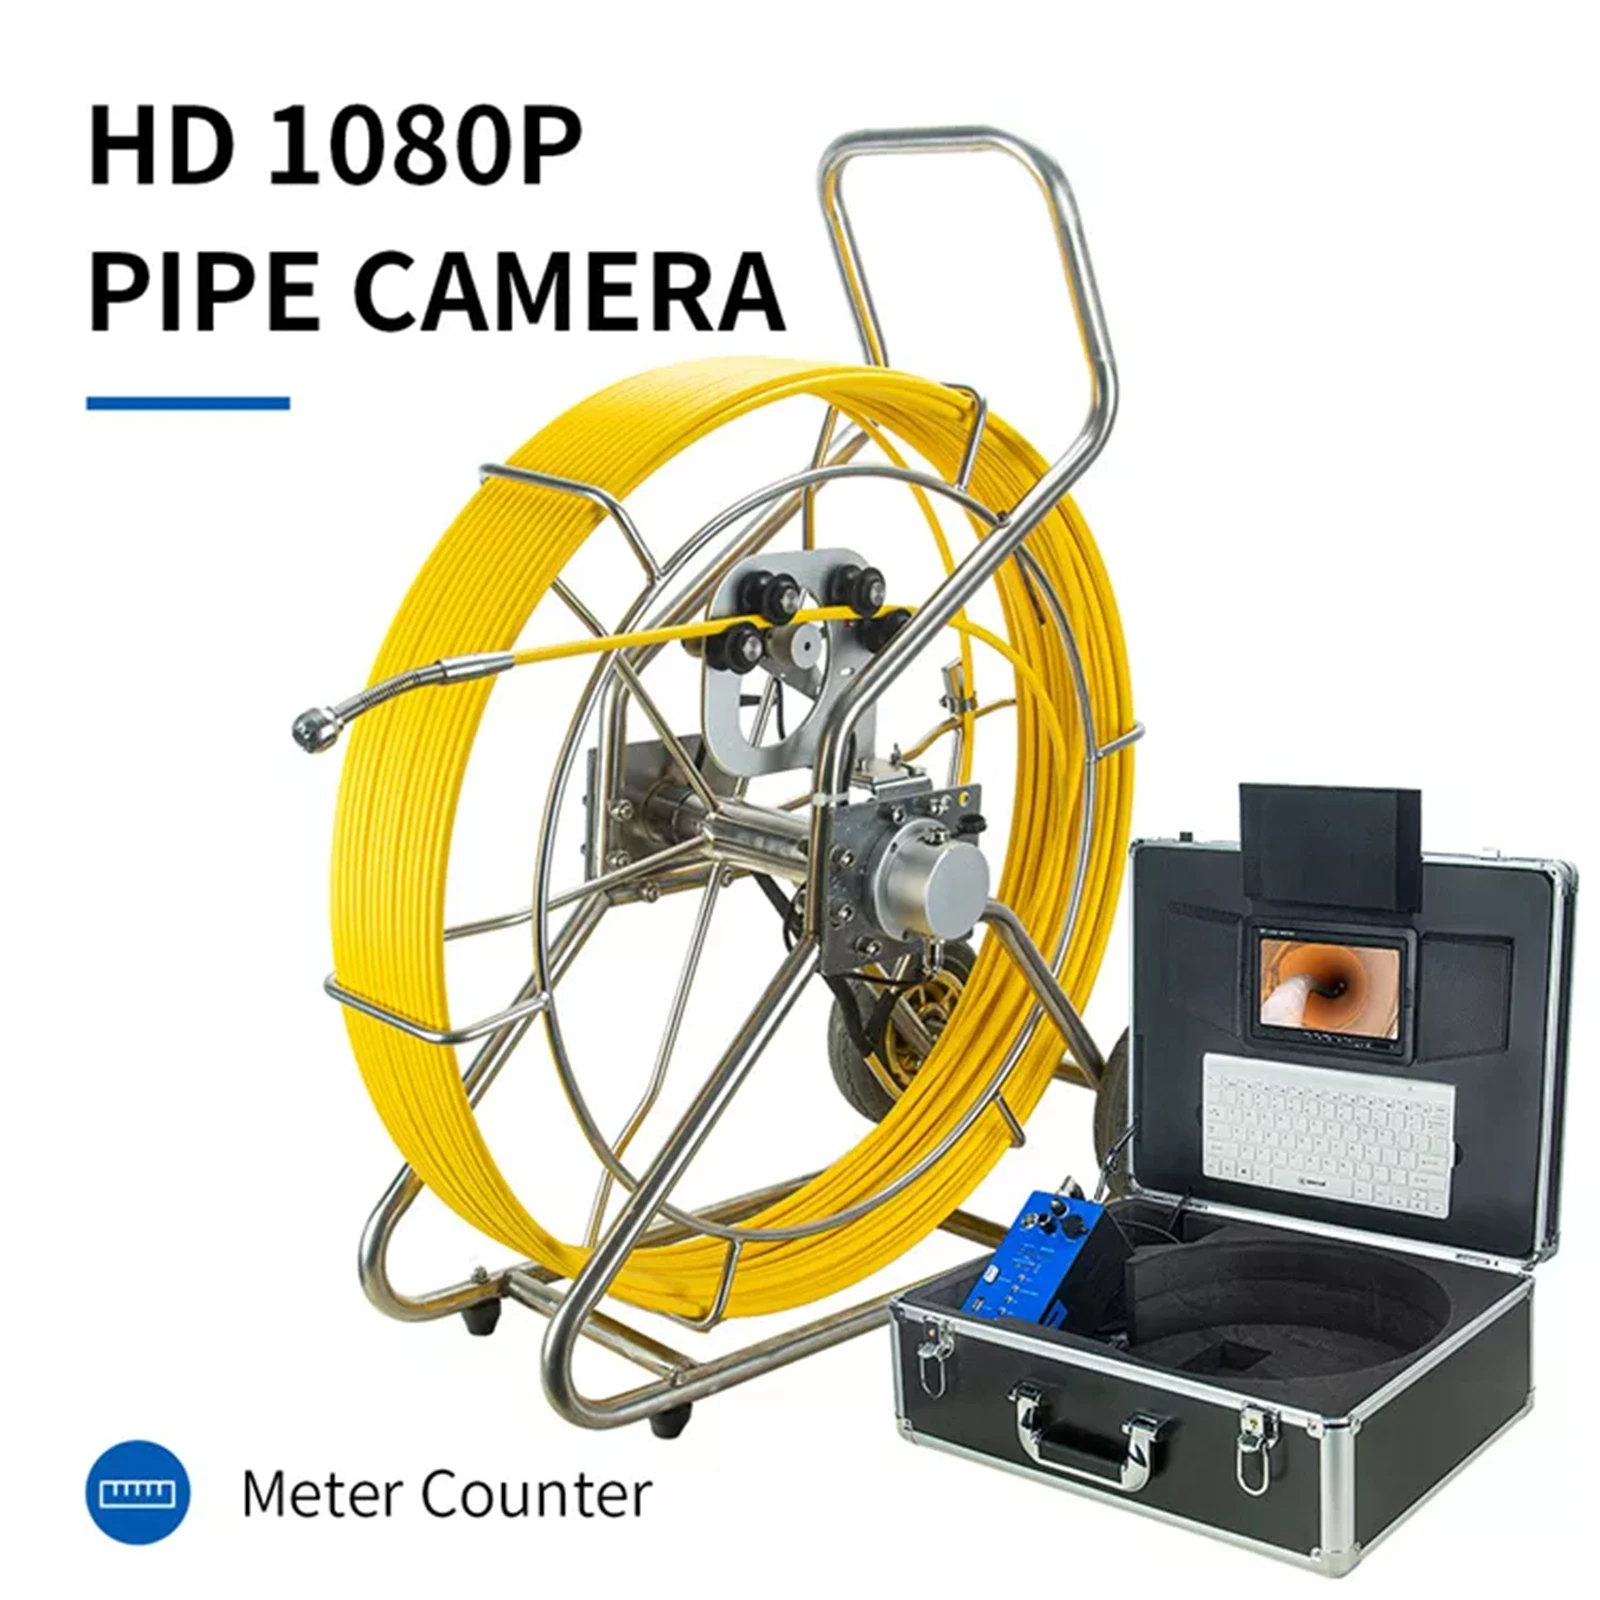 Pipe Inspection Camera, SYANSPAN 9 inch Sewer Endoscope Camer Meter Counter Vedio and Redio and 32X image enlarge and 9mm cable pipe inspection camera 10 1 1080p screen and self leveling 512hz locator video audio recording 8x image enlarge meter counter